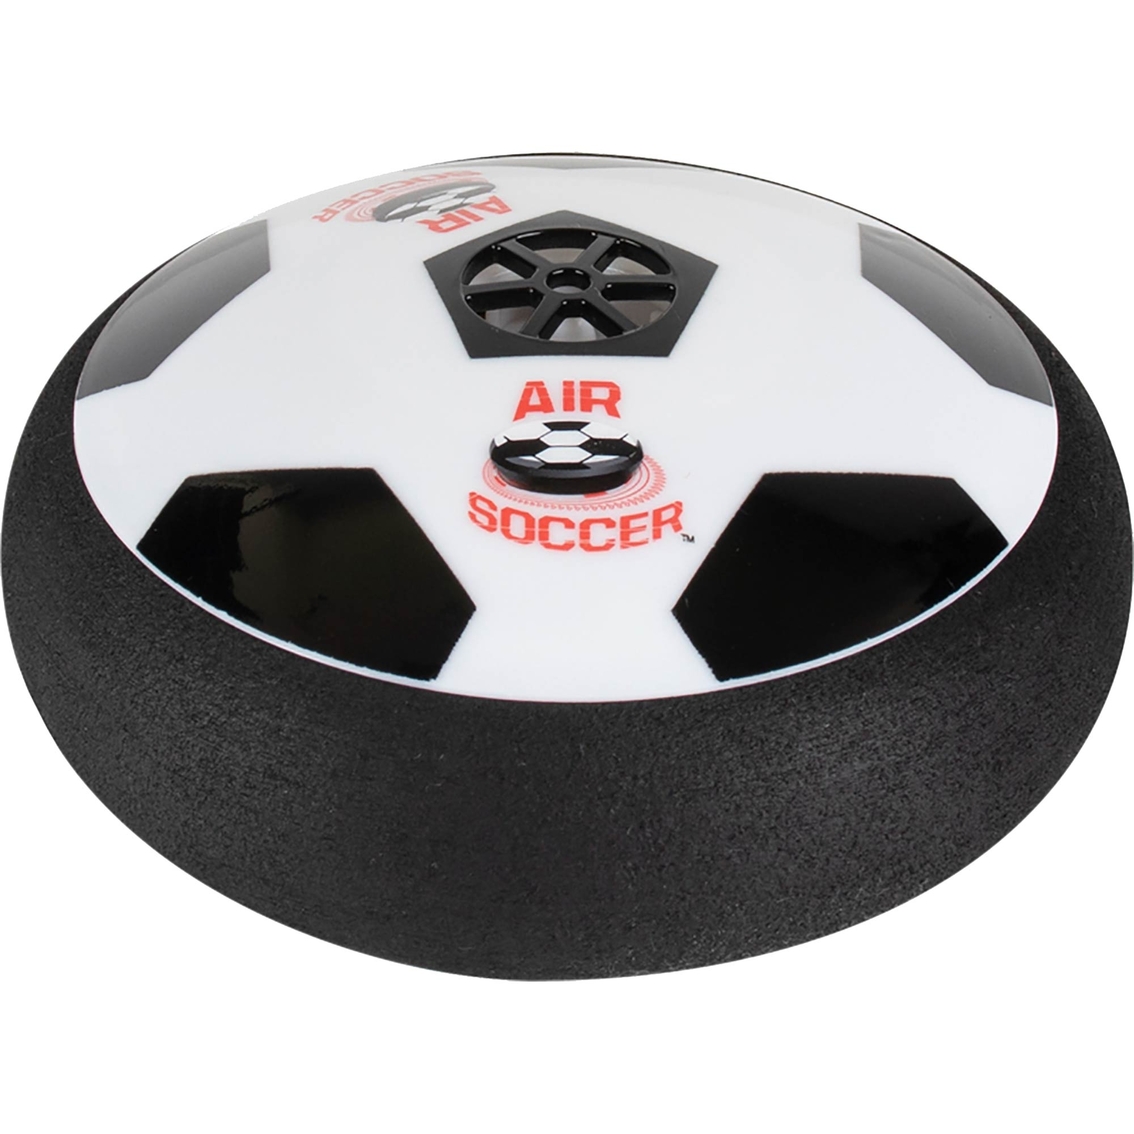 Maccabi Art Air Soccer Set with Paddles and Nets Action Game - Image 4 of 5